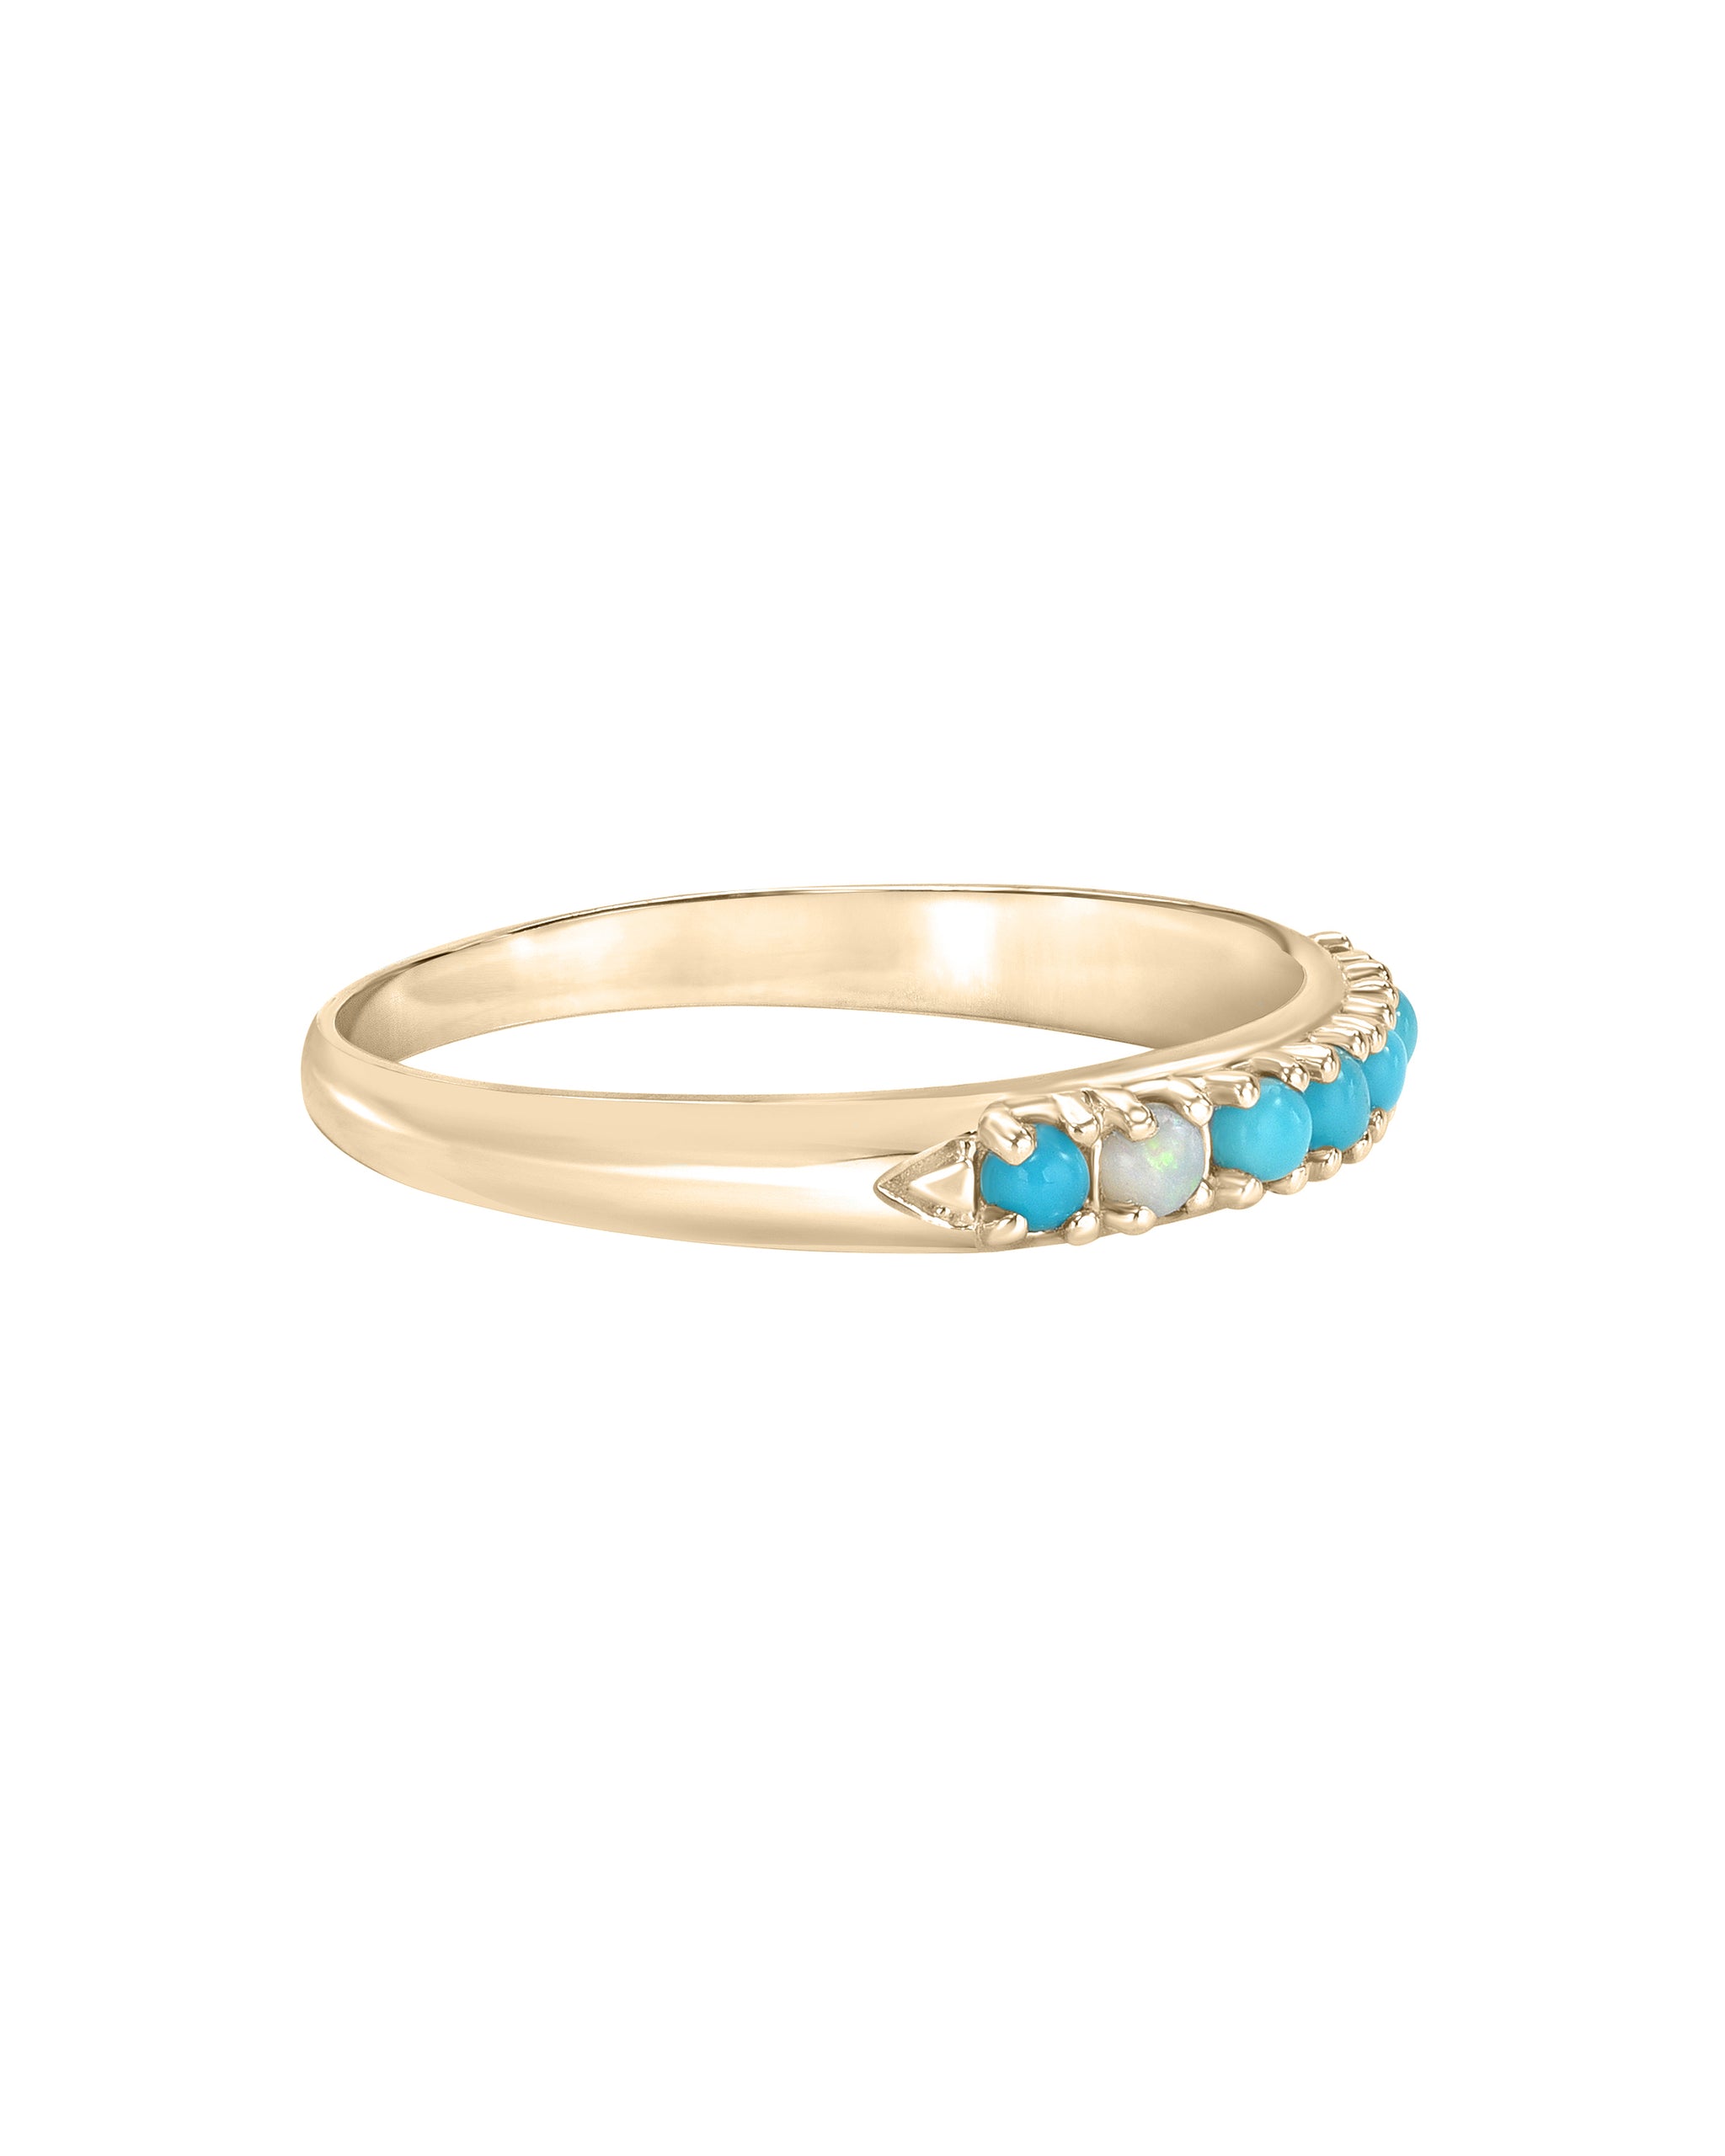 Wylde Ring, Turquoise and Opal 14k yellow gold chevron ring, handmade by Turquoise + Tobacco in Los Angeles, California